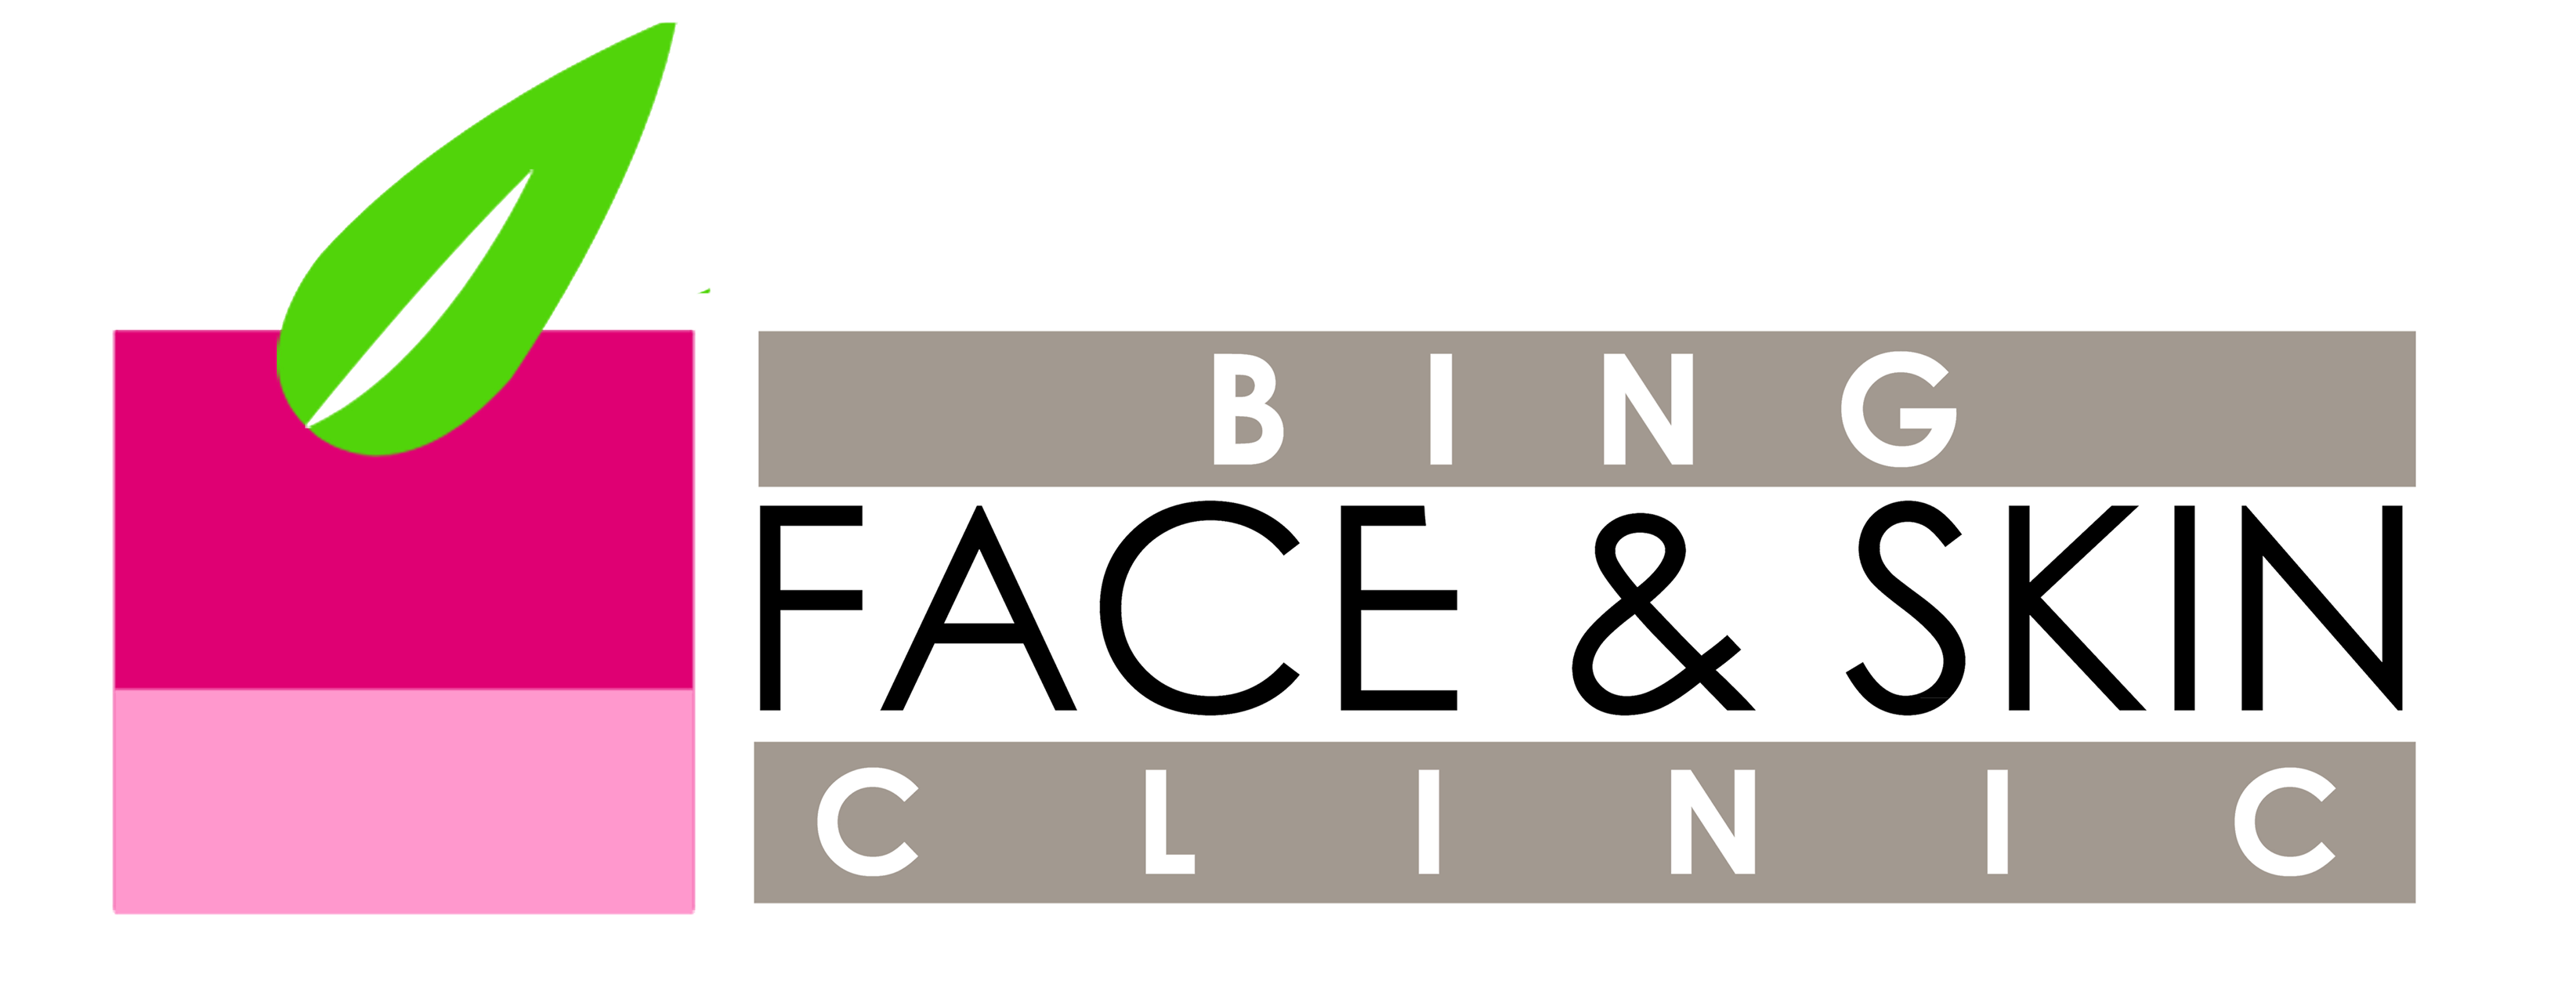 Clients | Bing Face & Skin Clinic